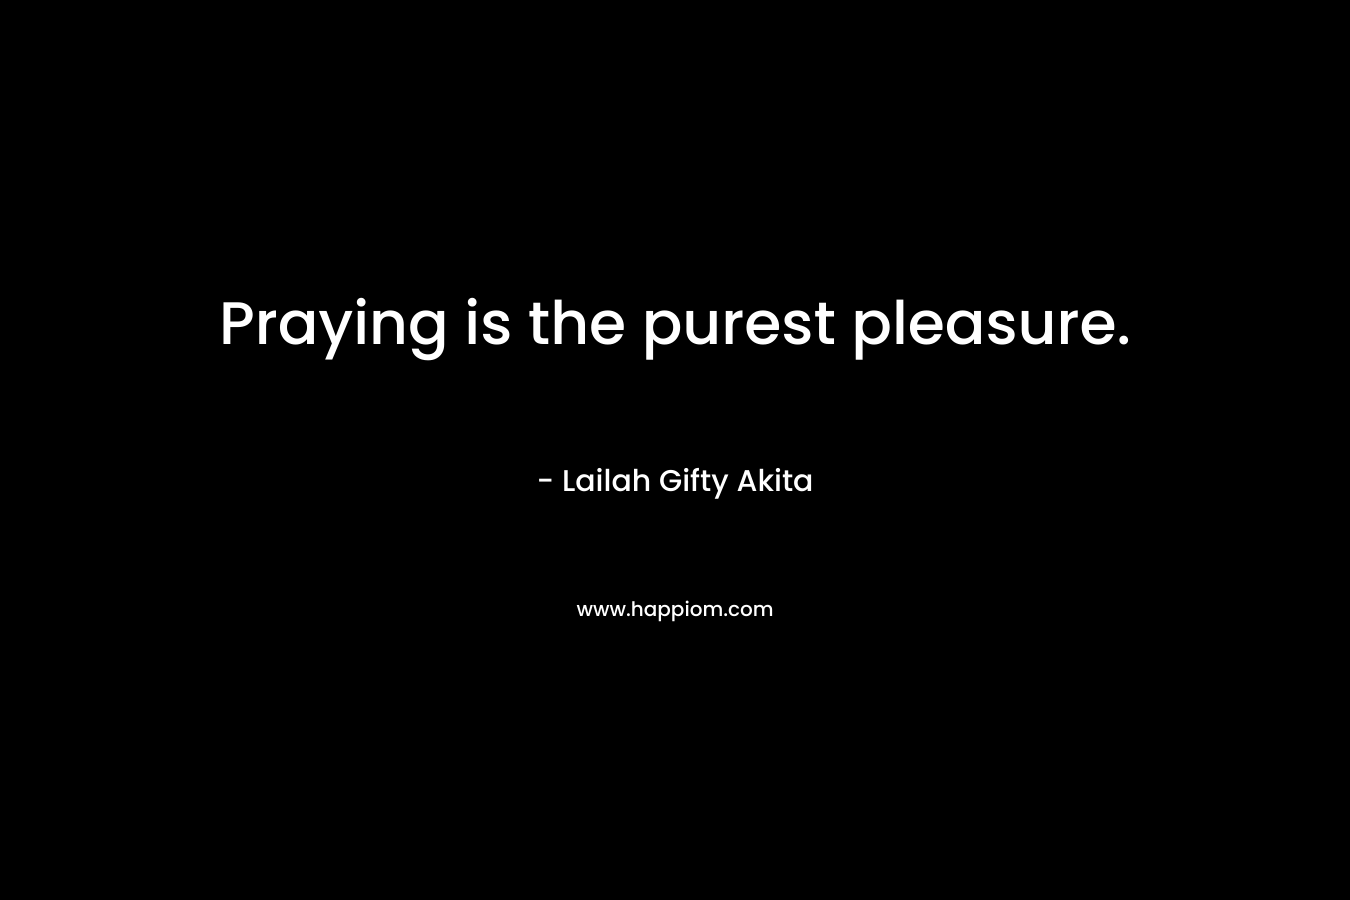 Praying is the purest pleasure.